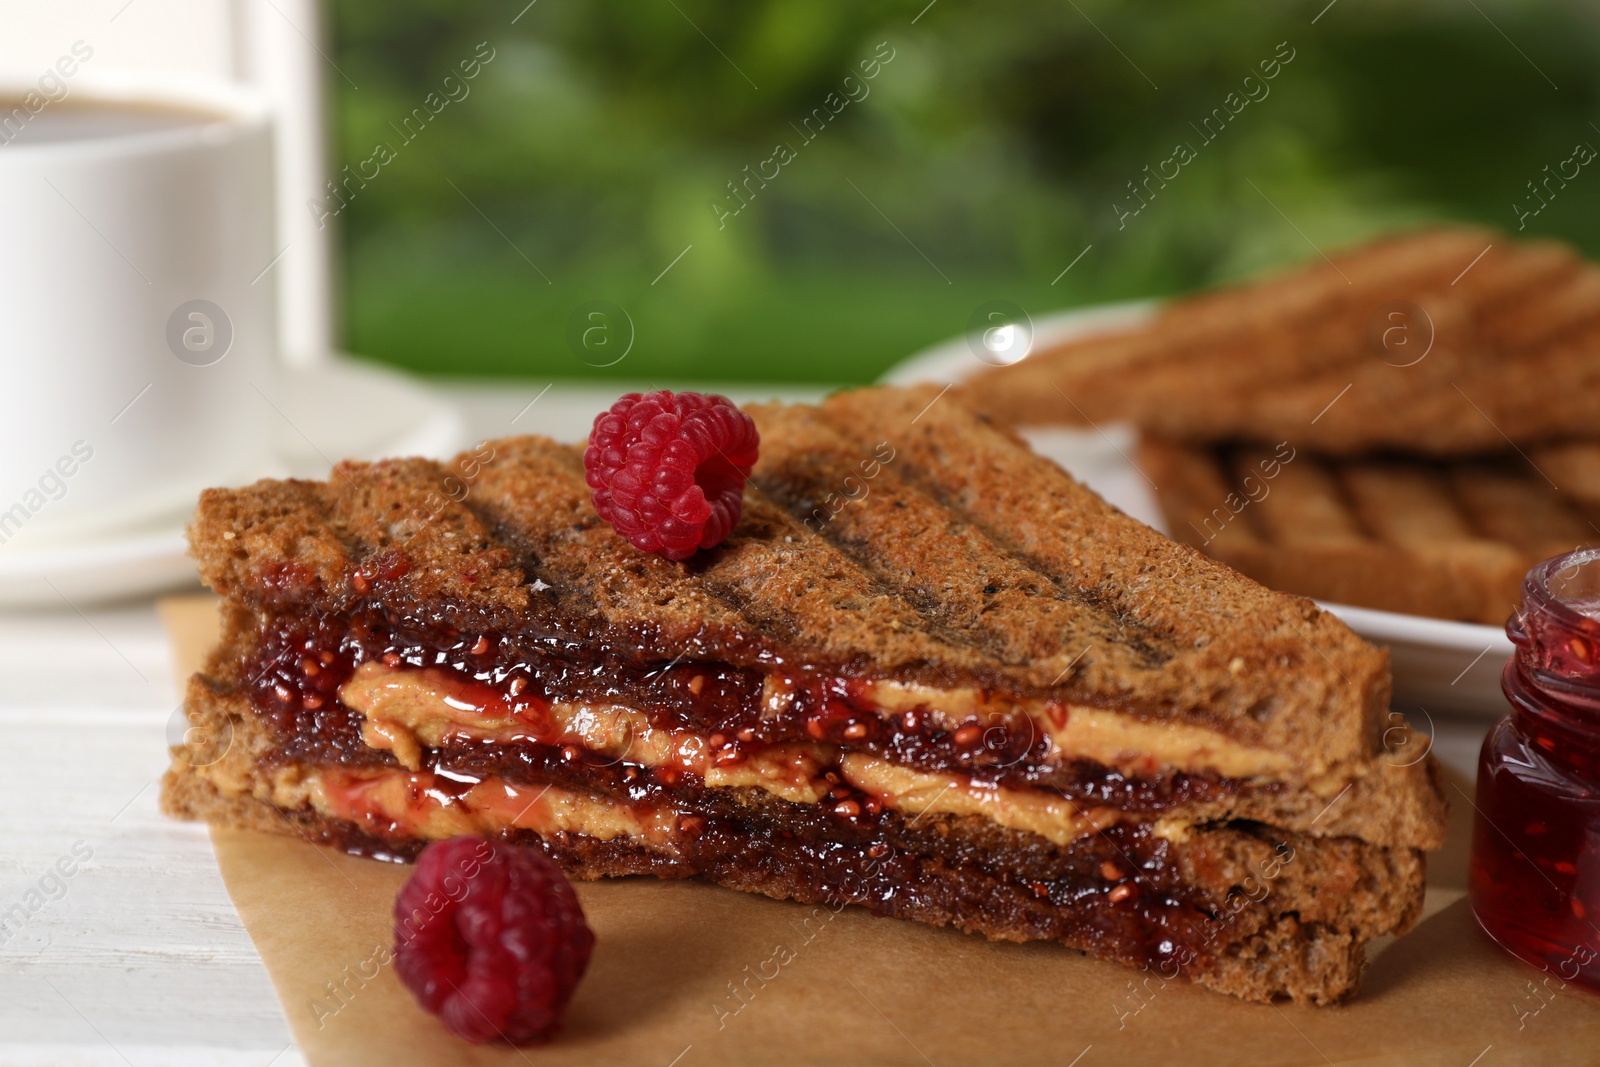 Image of Tasty sandwich with raspberry jam and peanut butter for breakfast on table, closeup